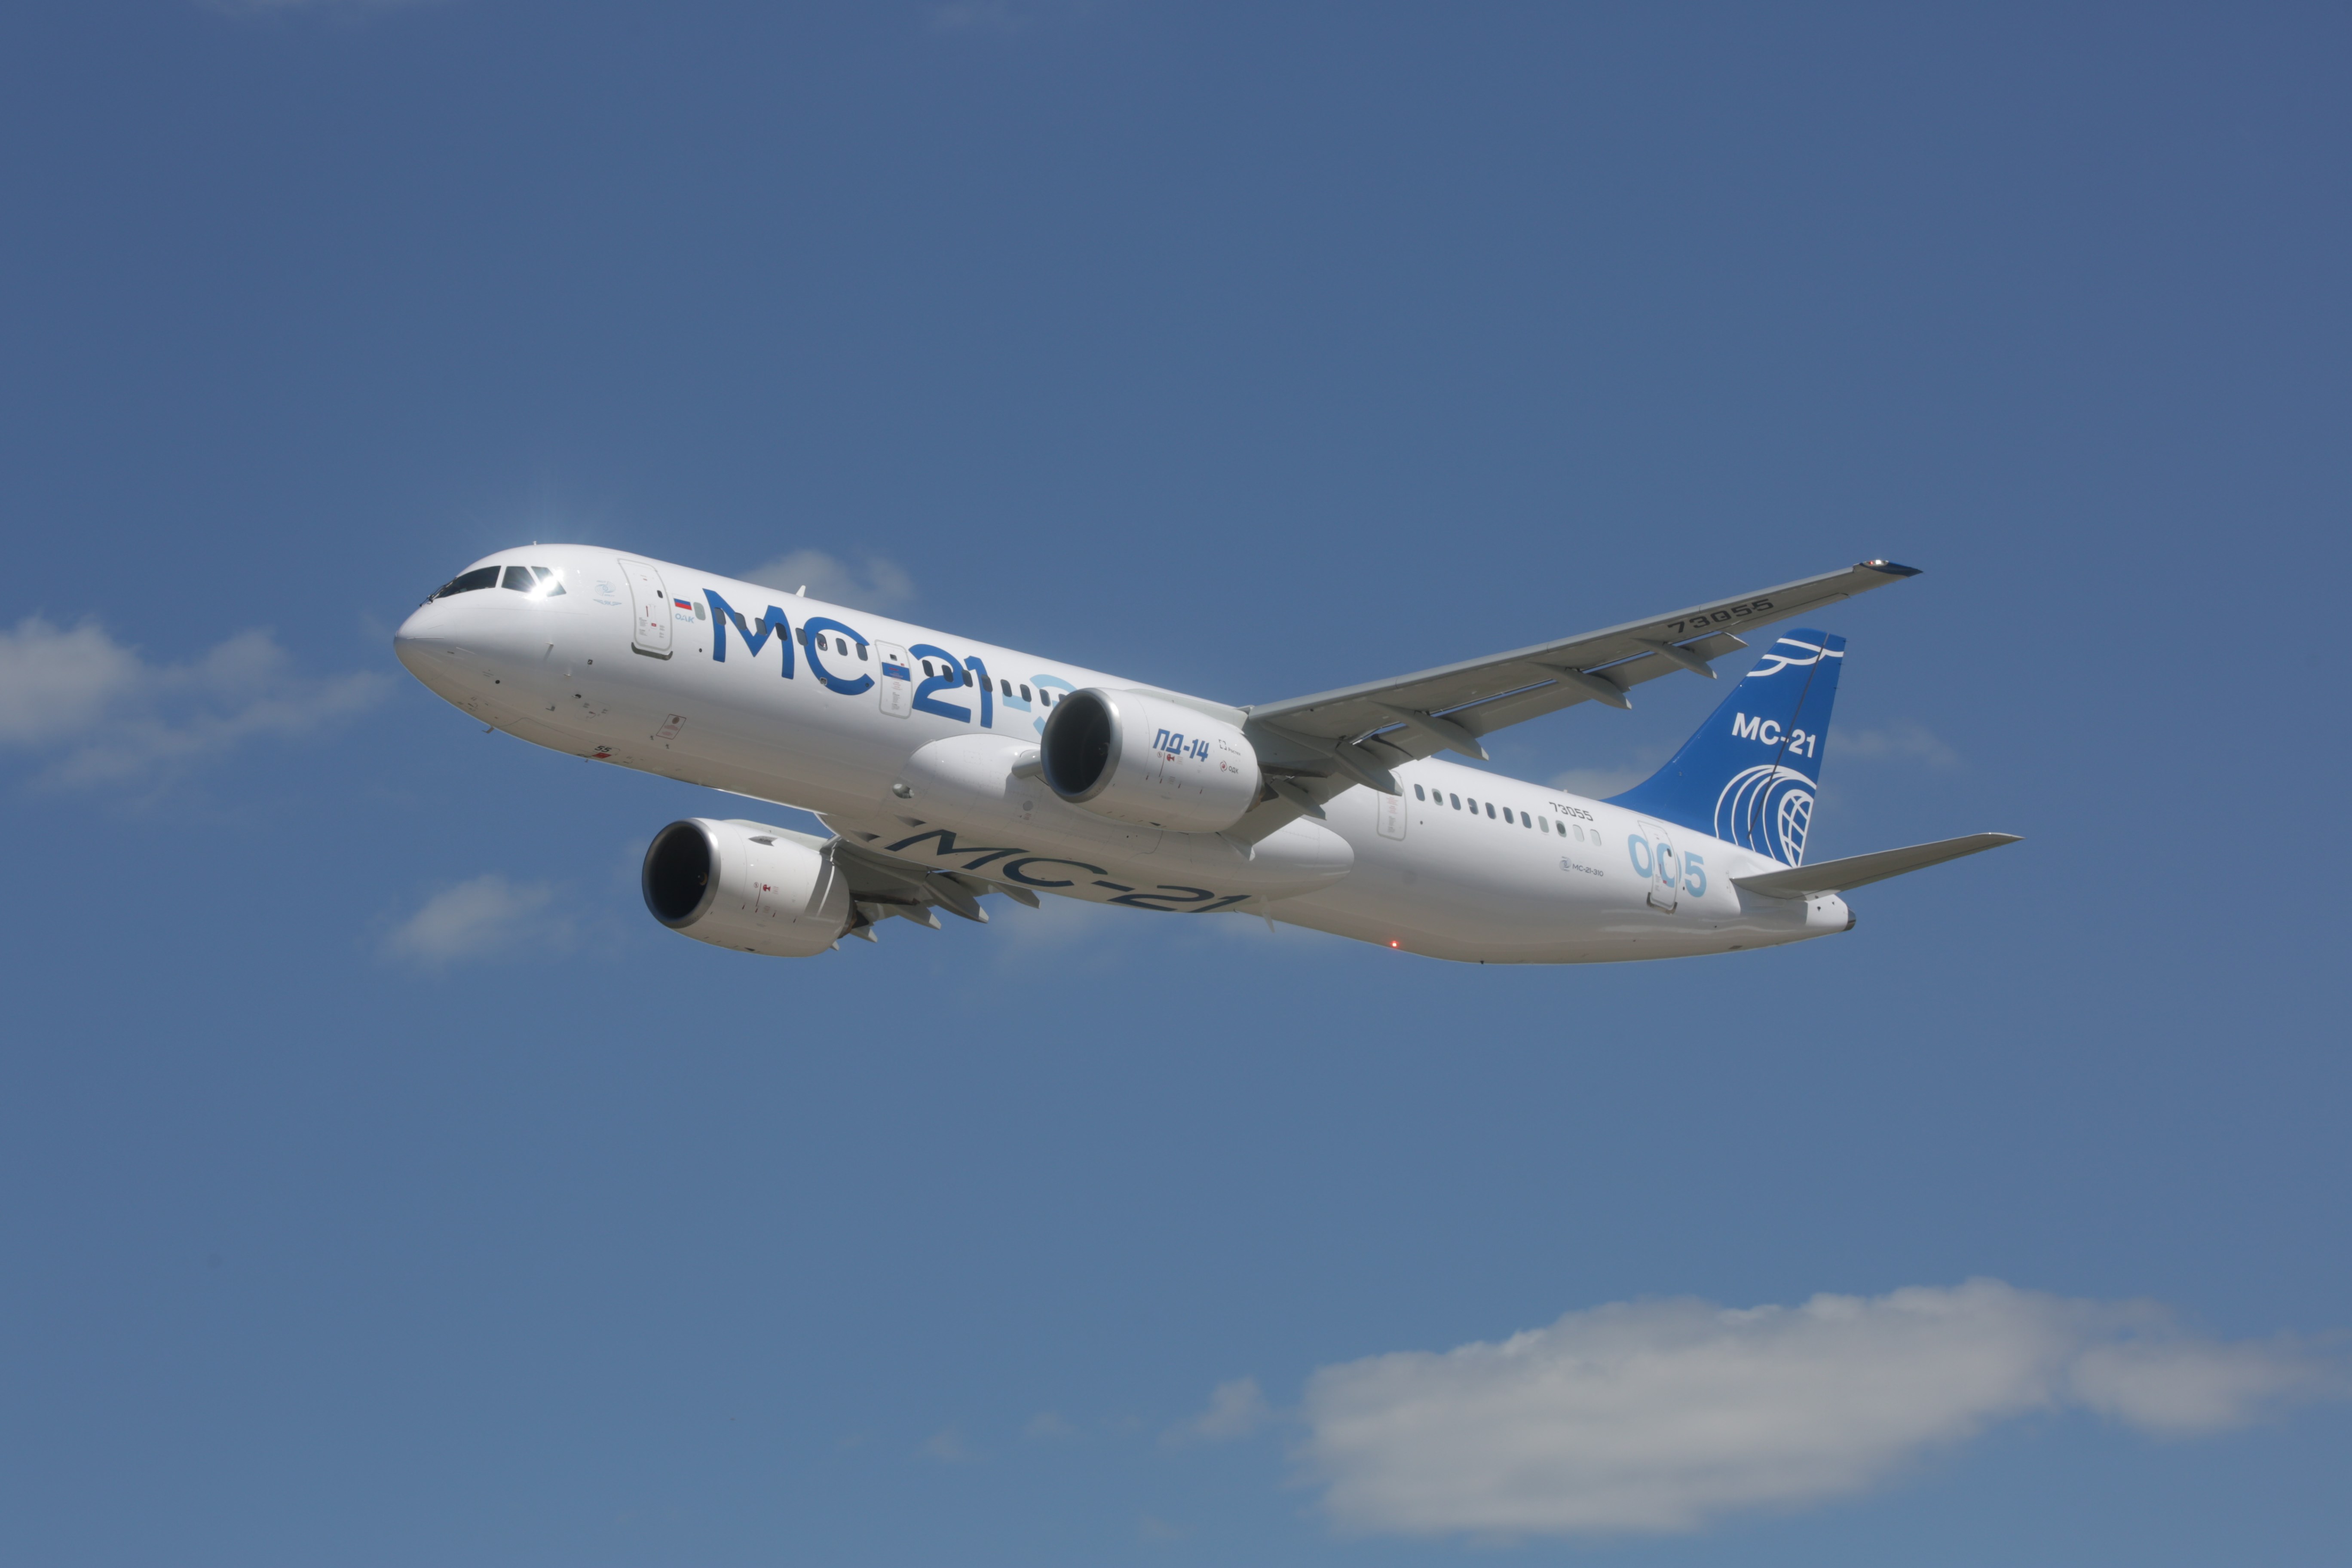 MC-21 With Russian Engines Makes its First Demonstration Flight Abroad